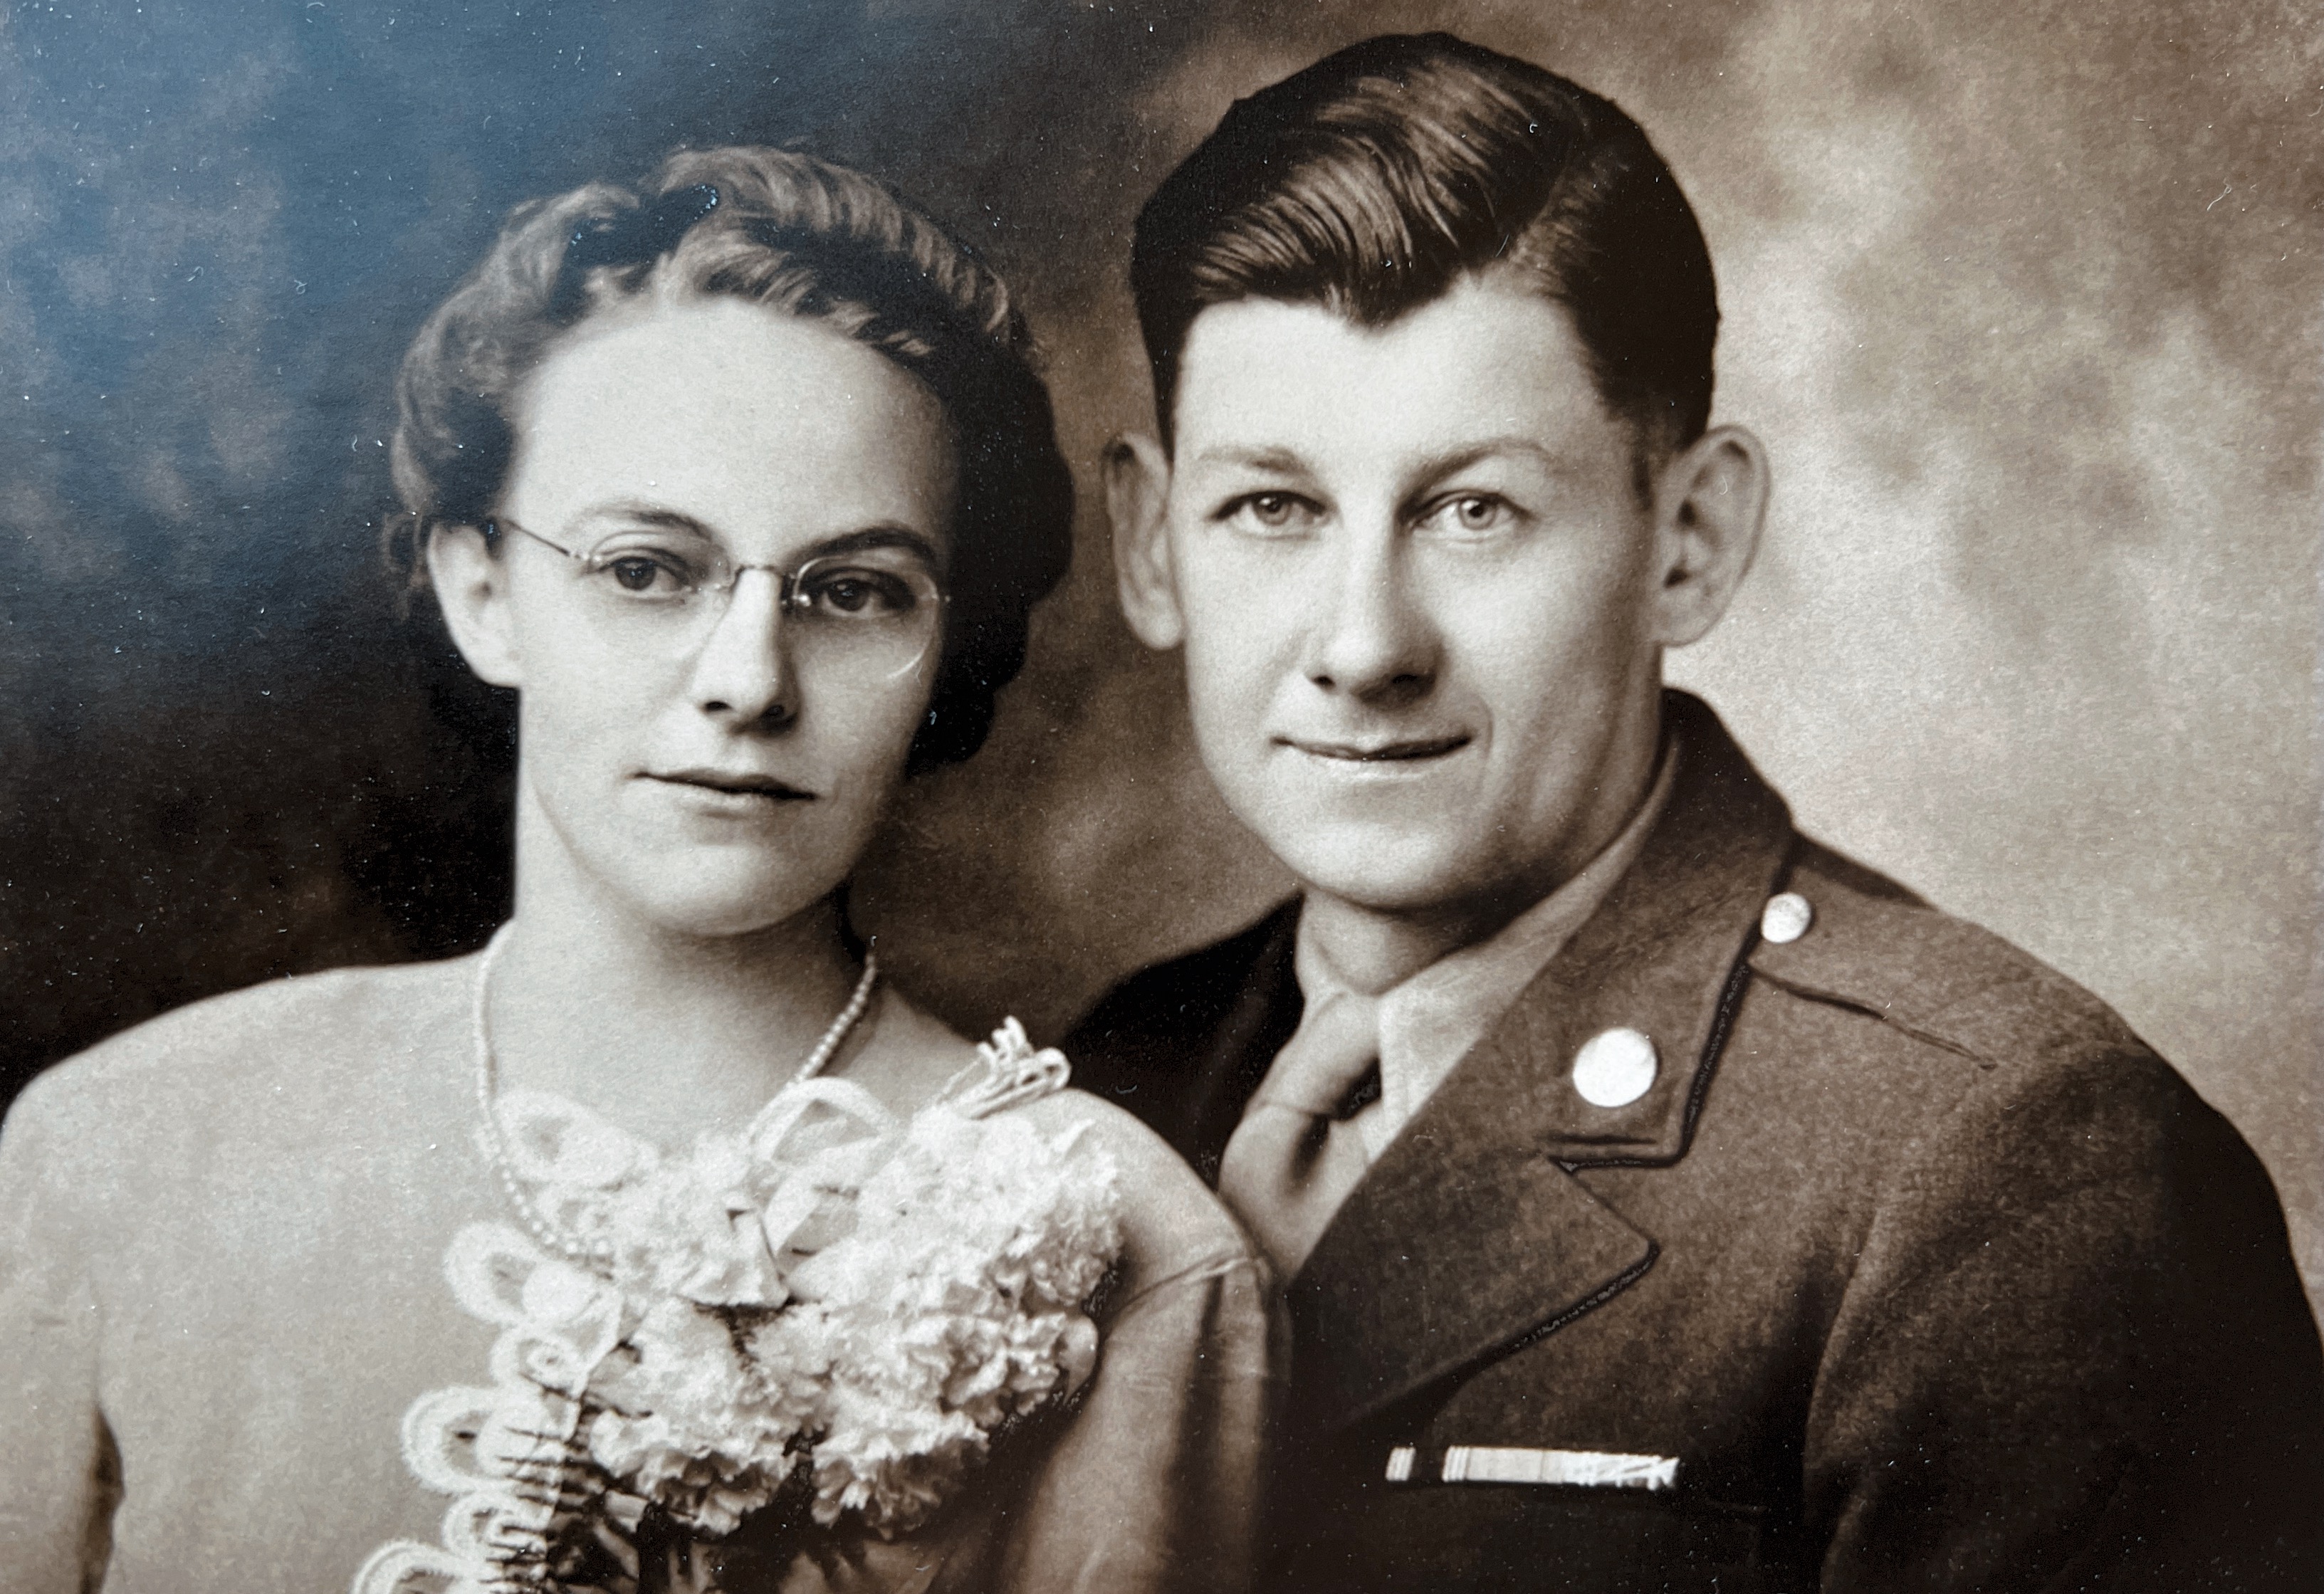 Wilma Dowd and Kermit Hall Married March 16, 1945